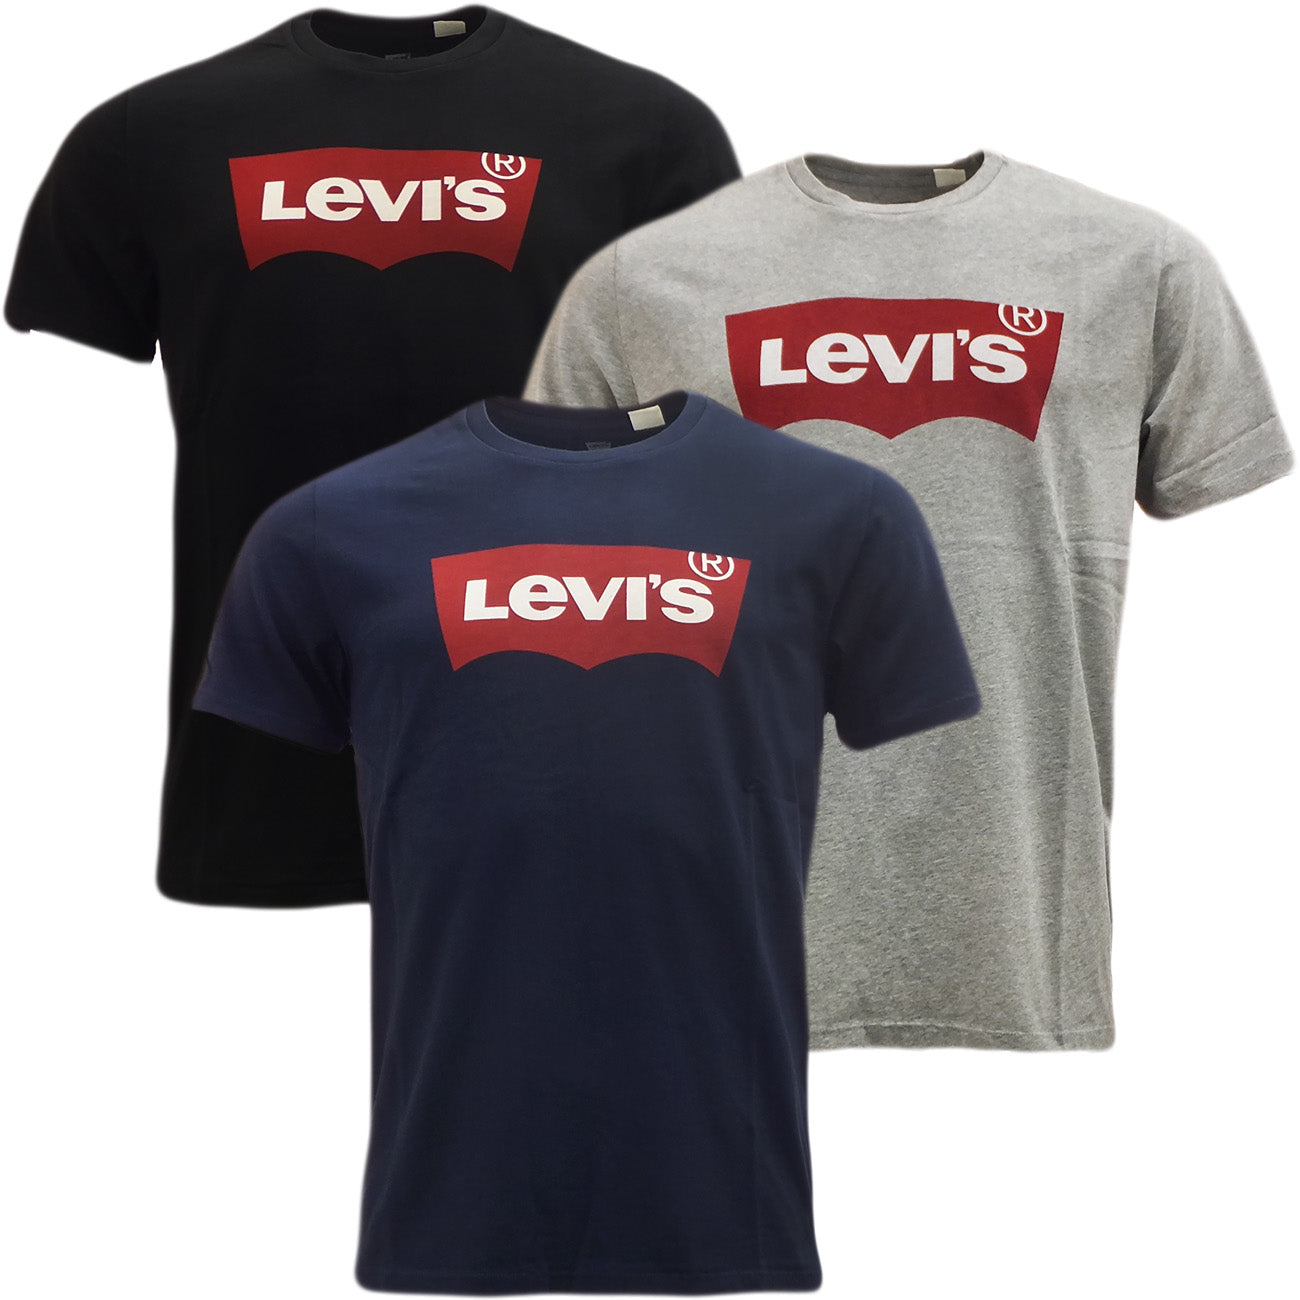 You can't go wrong wearing this men's Levi's tee.   PRODUCT FEATURES  Levi's logo Crewneck Short sleeves FABRIC & CARE  Cotton, polyester Machine wash Imported